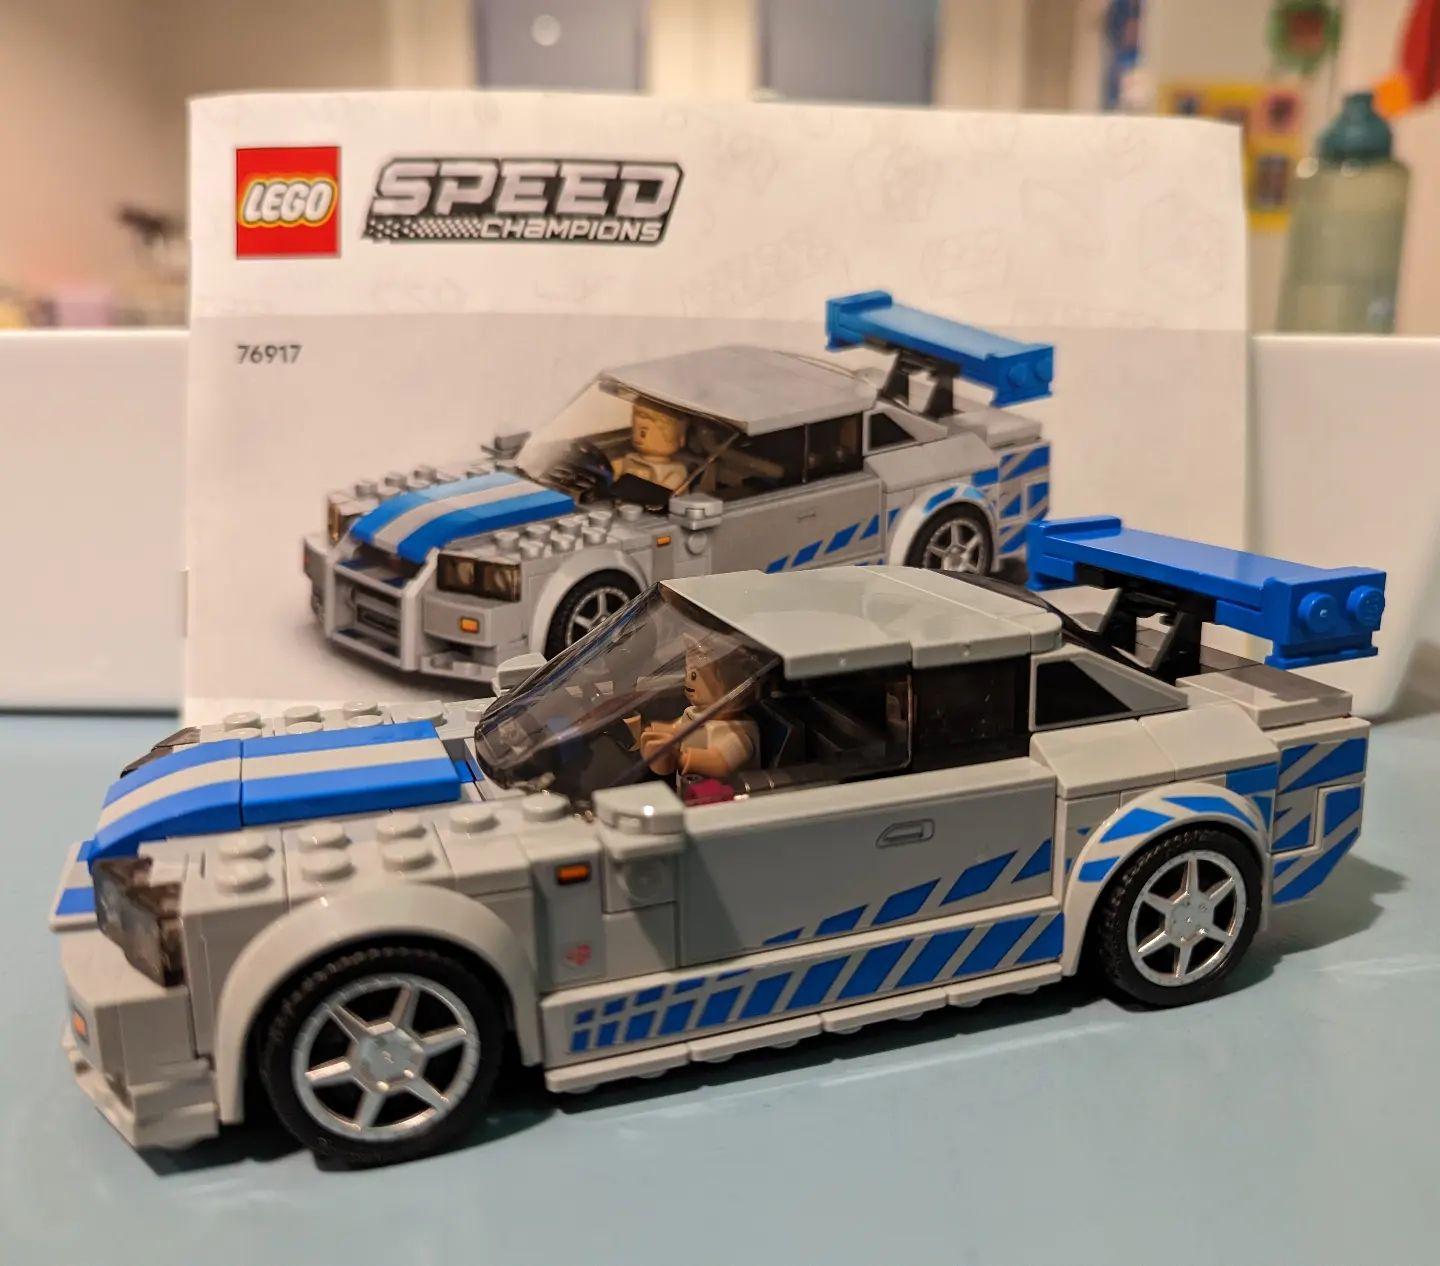 76917 LEGO® SPEED CHAMPIONS 2 Fast 2 Furious – Nissan Skyline GT-R (R34) -  Conrad Electronic France